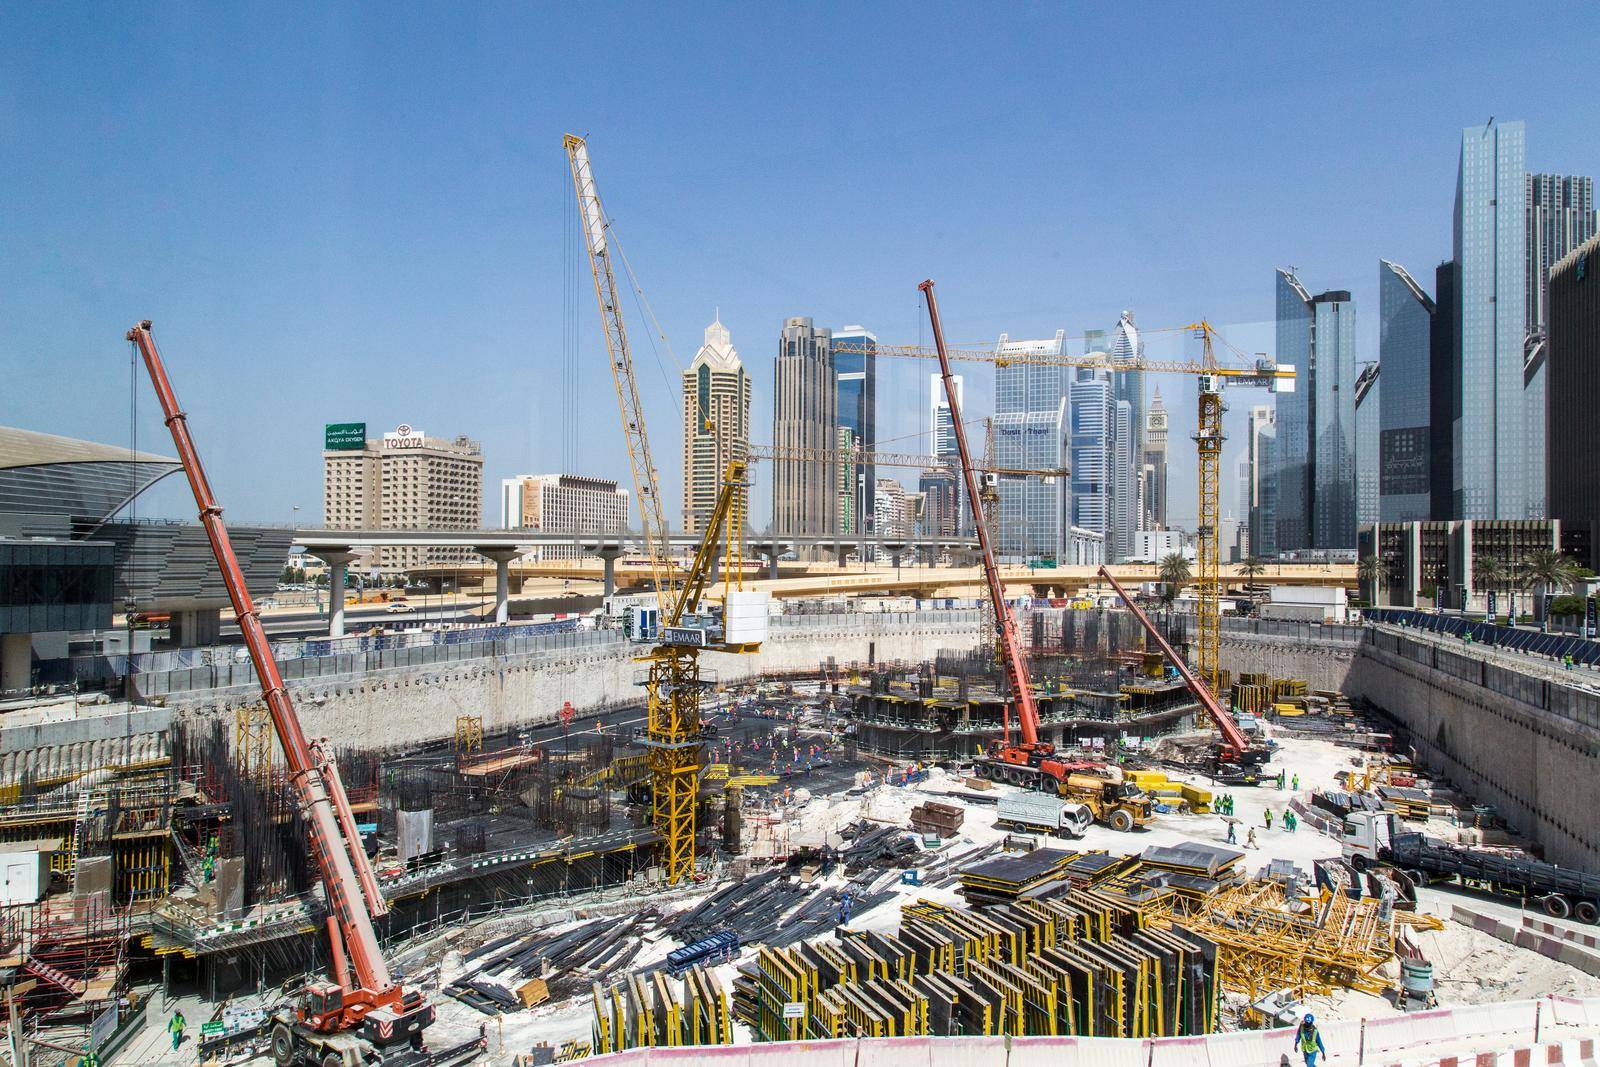 Dubai, United Arab Emirates - October 16, 2014: Construction site for a new building in Downtown Dubai